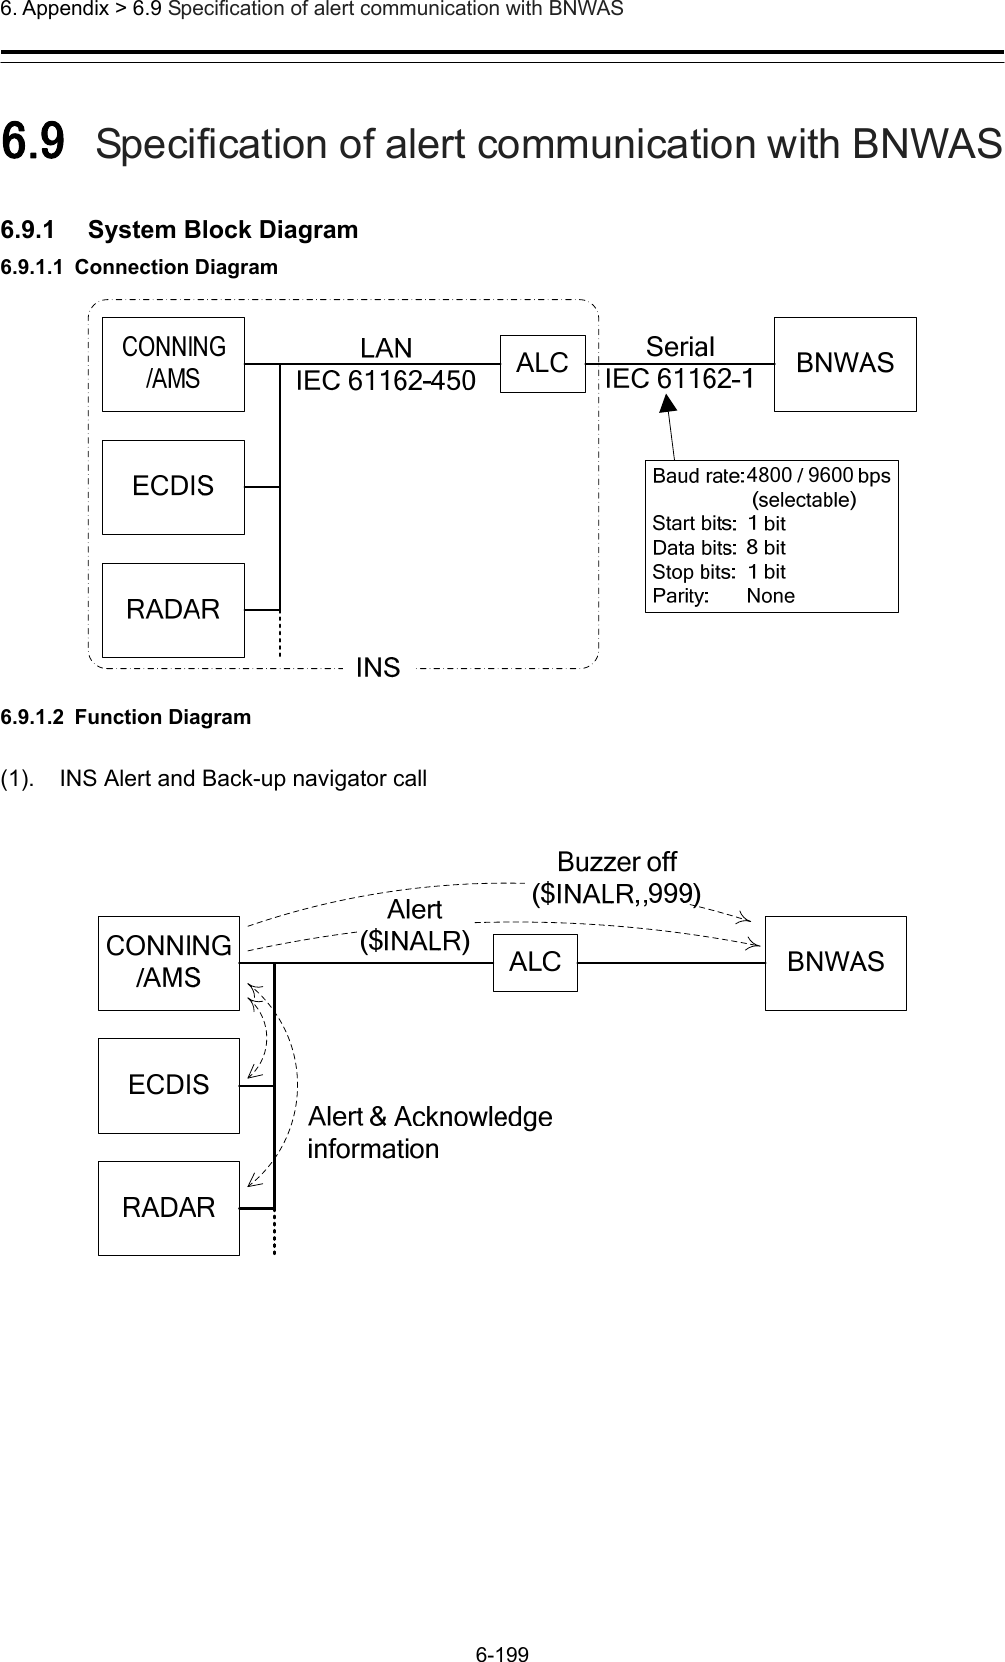  6. Appendix &gt; 6.9 Specification of alert communication with BNWAS 6-199  6.9   Specification of alert communication with BNWAS  6.9.1    System Block Diagram 6.9.1.1 Connection Diagram  6.9.1.2 Function Diagram (1).    INS Alert and Back-up navigator call   